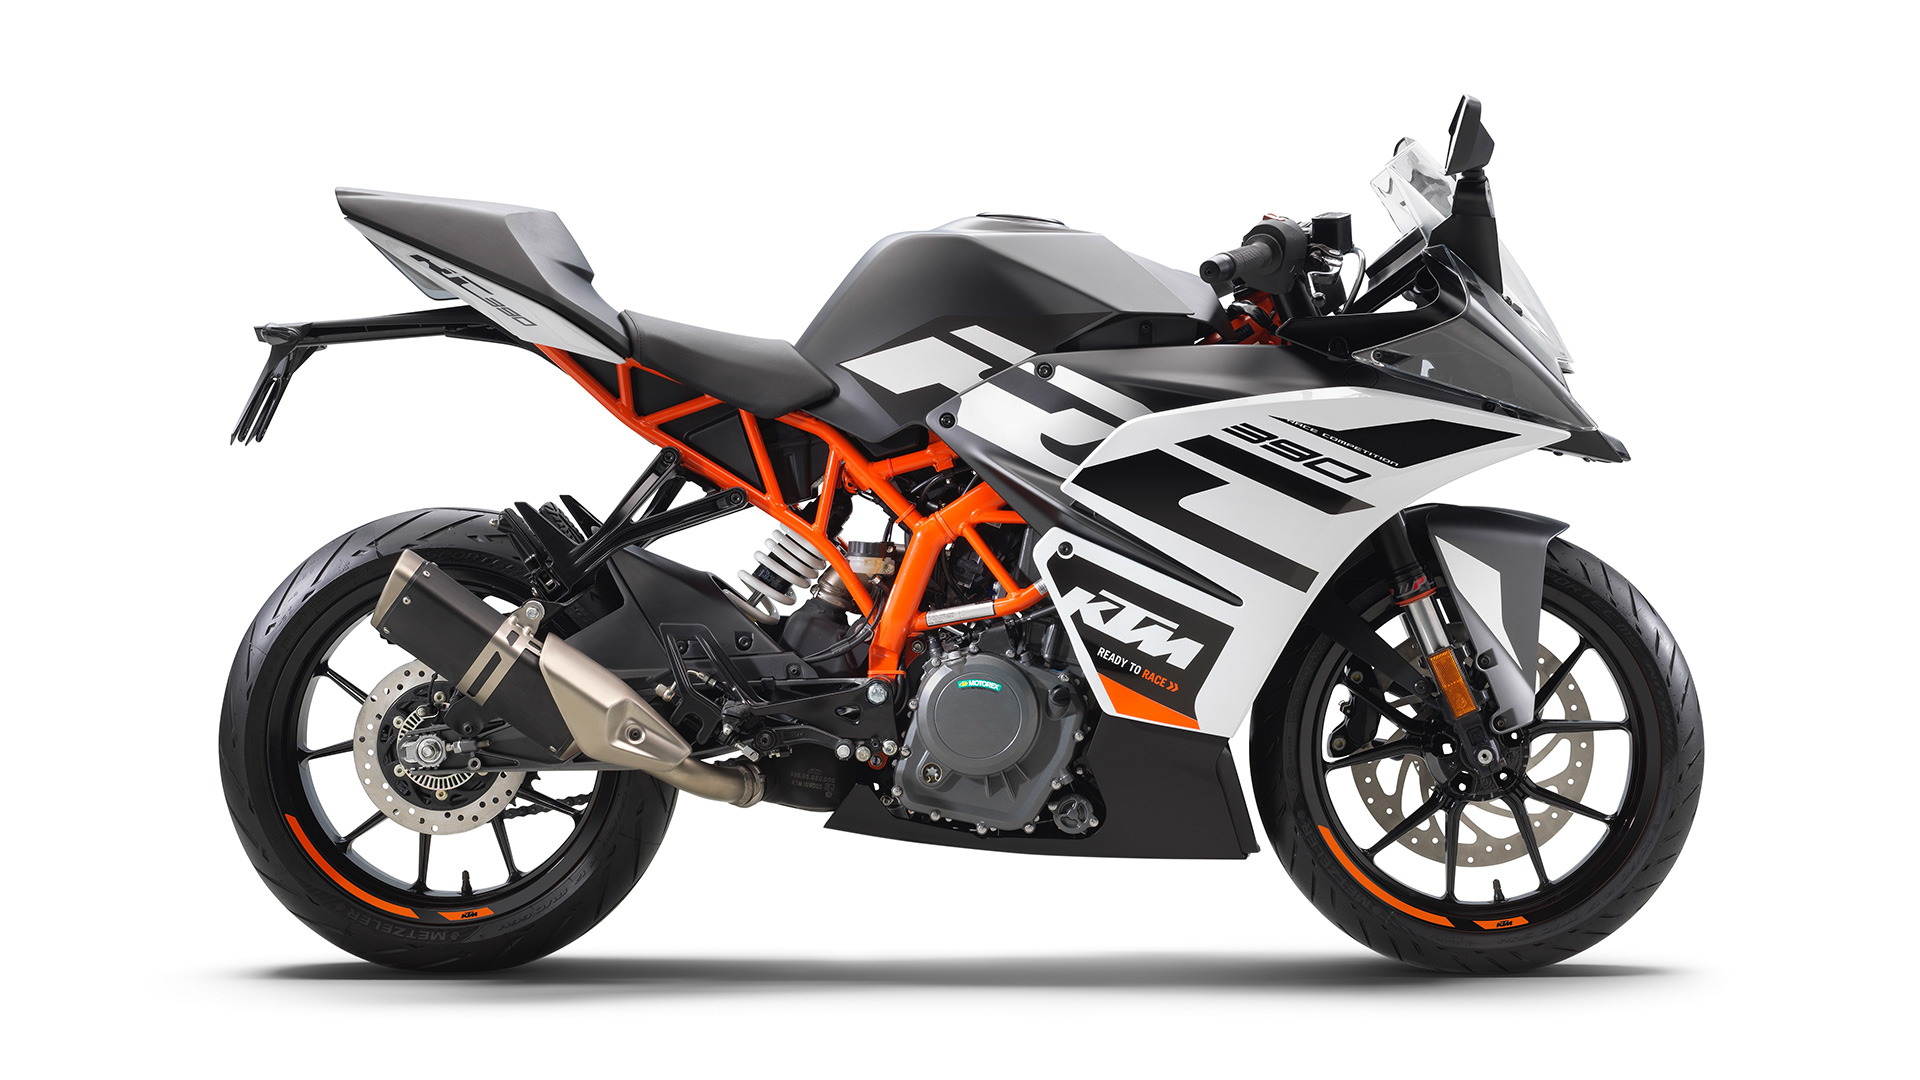 KTM RC 390 2020 - Price, Mileage, Reviews, Specification, Gallery -  Overdrive